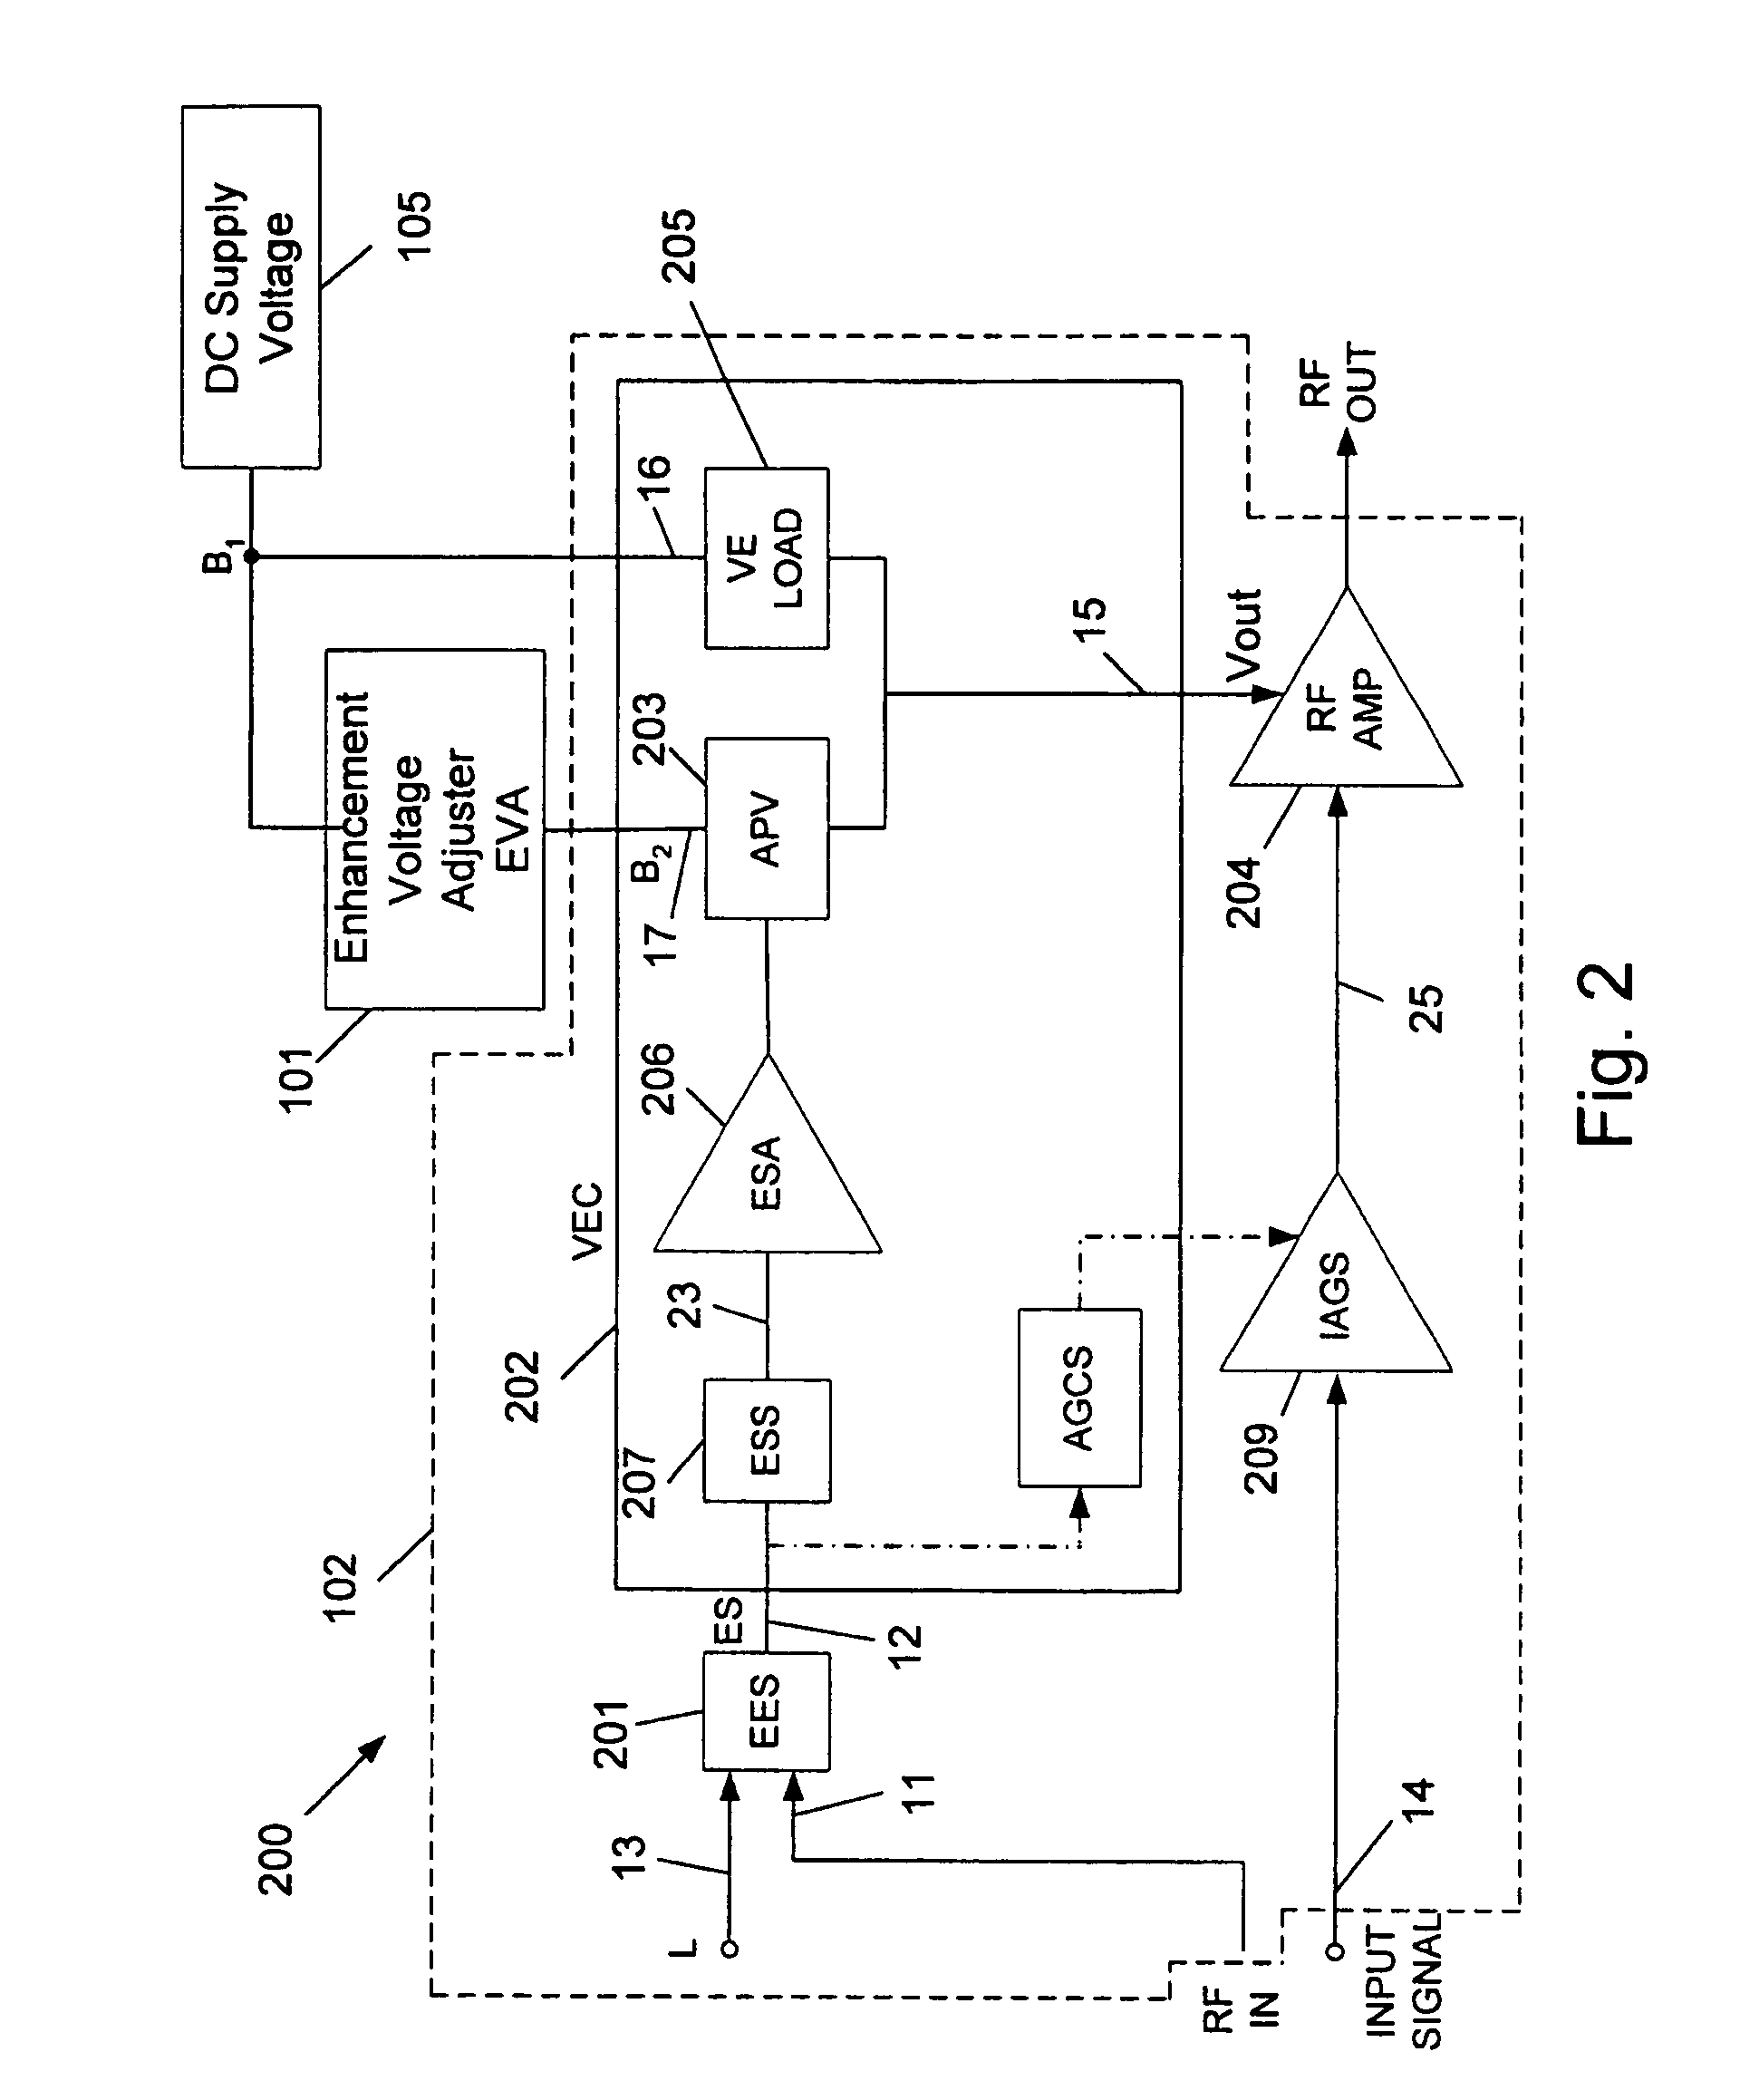 Method and apparatus for providing a stable power output of power amplifiers, operating under unstable supply voltage conditions